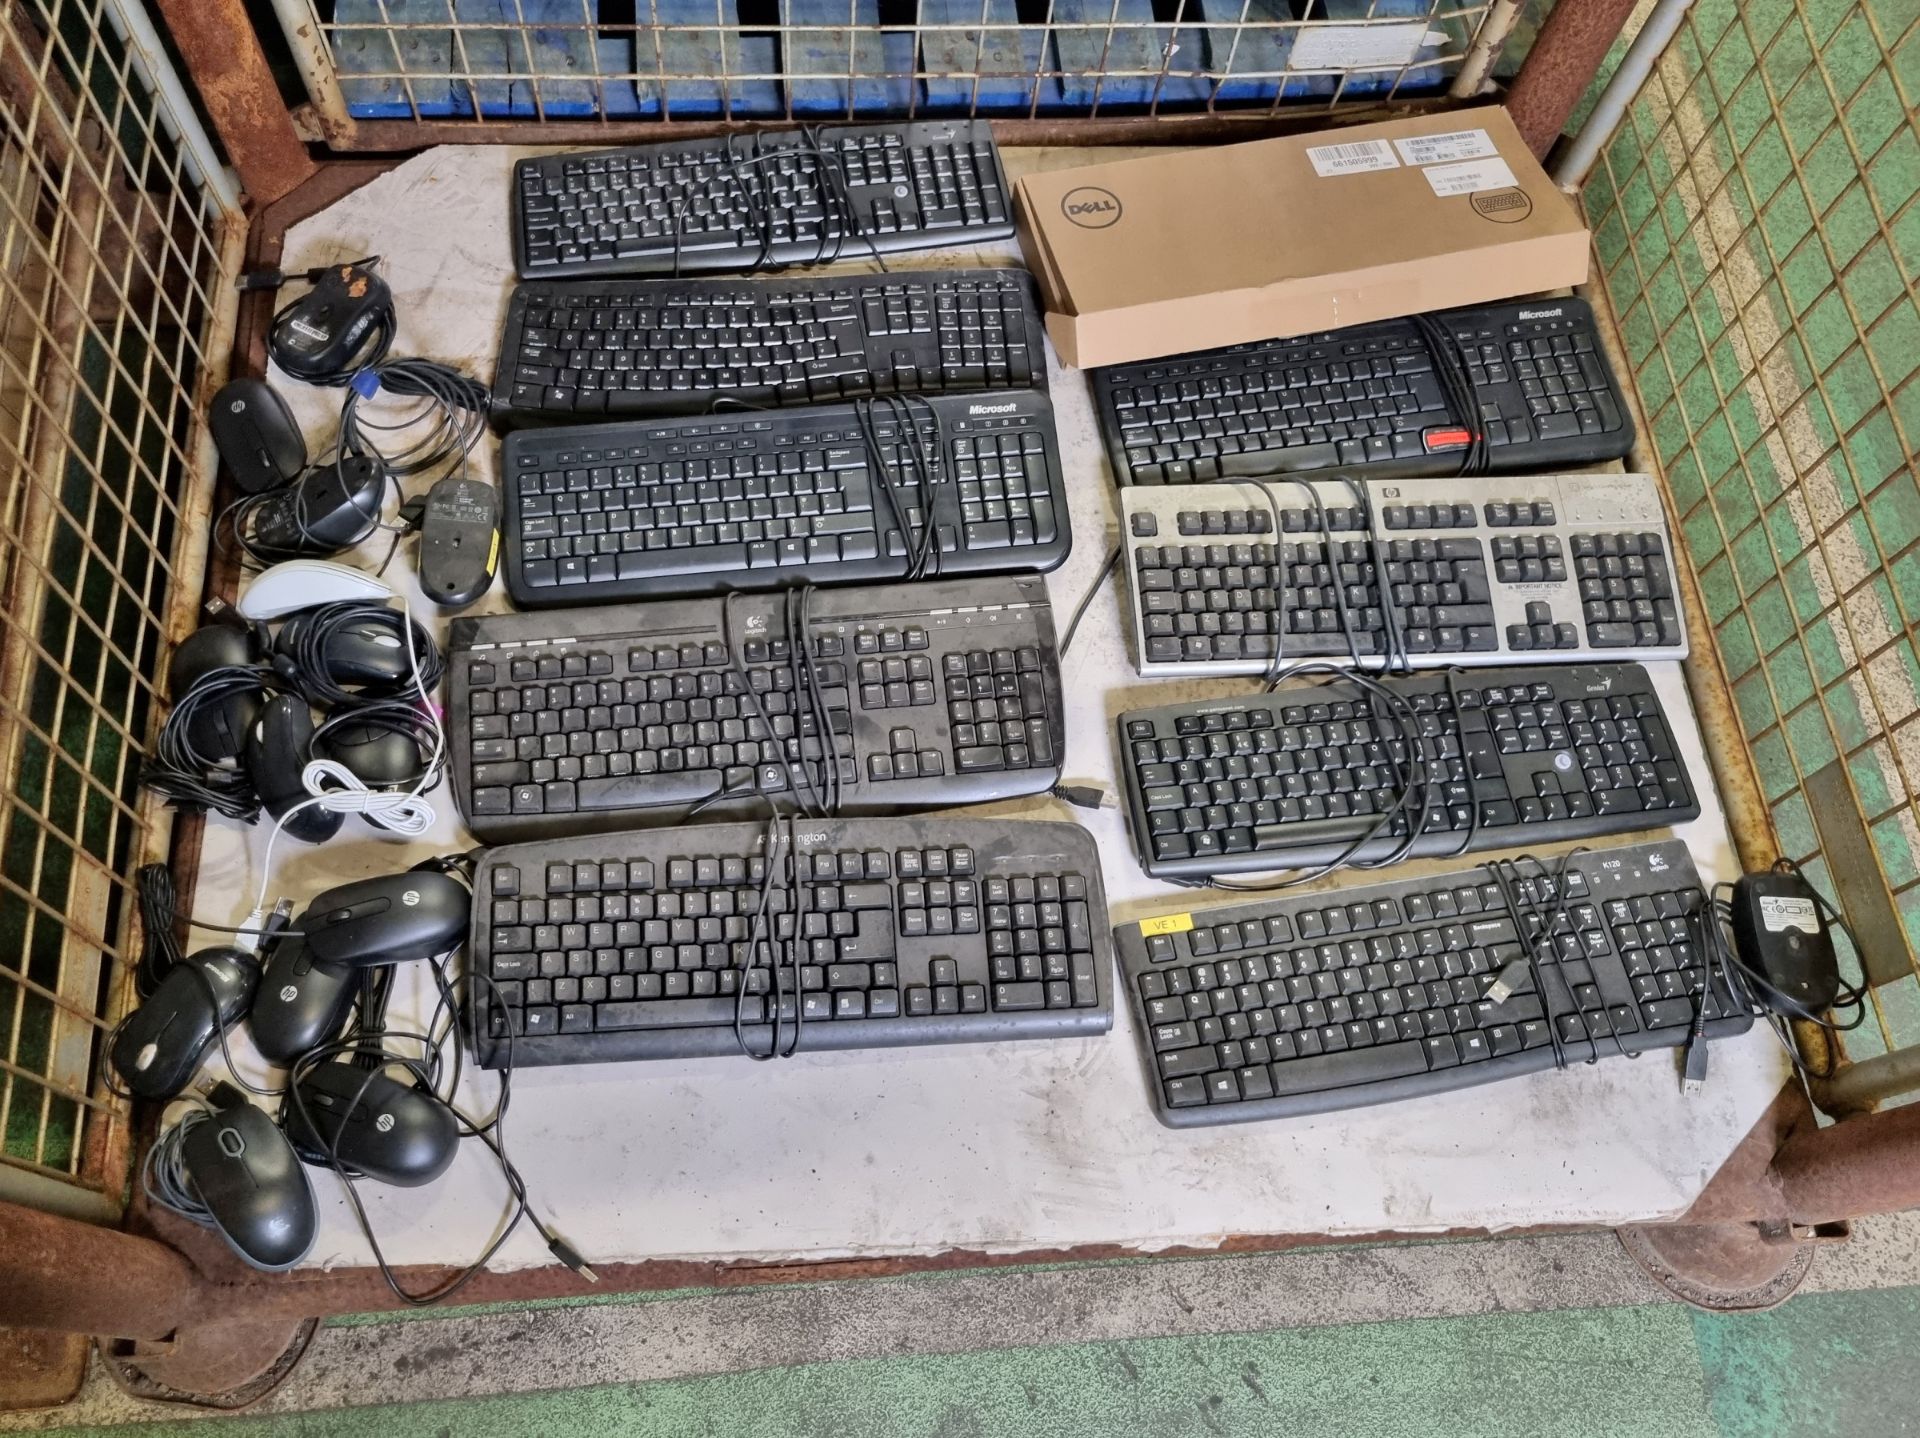 10x wired and wireless keyboards - 13x wired mice - Image 2 of 5